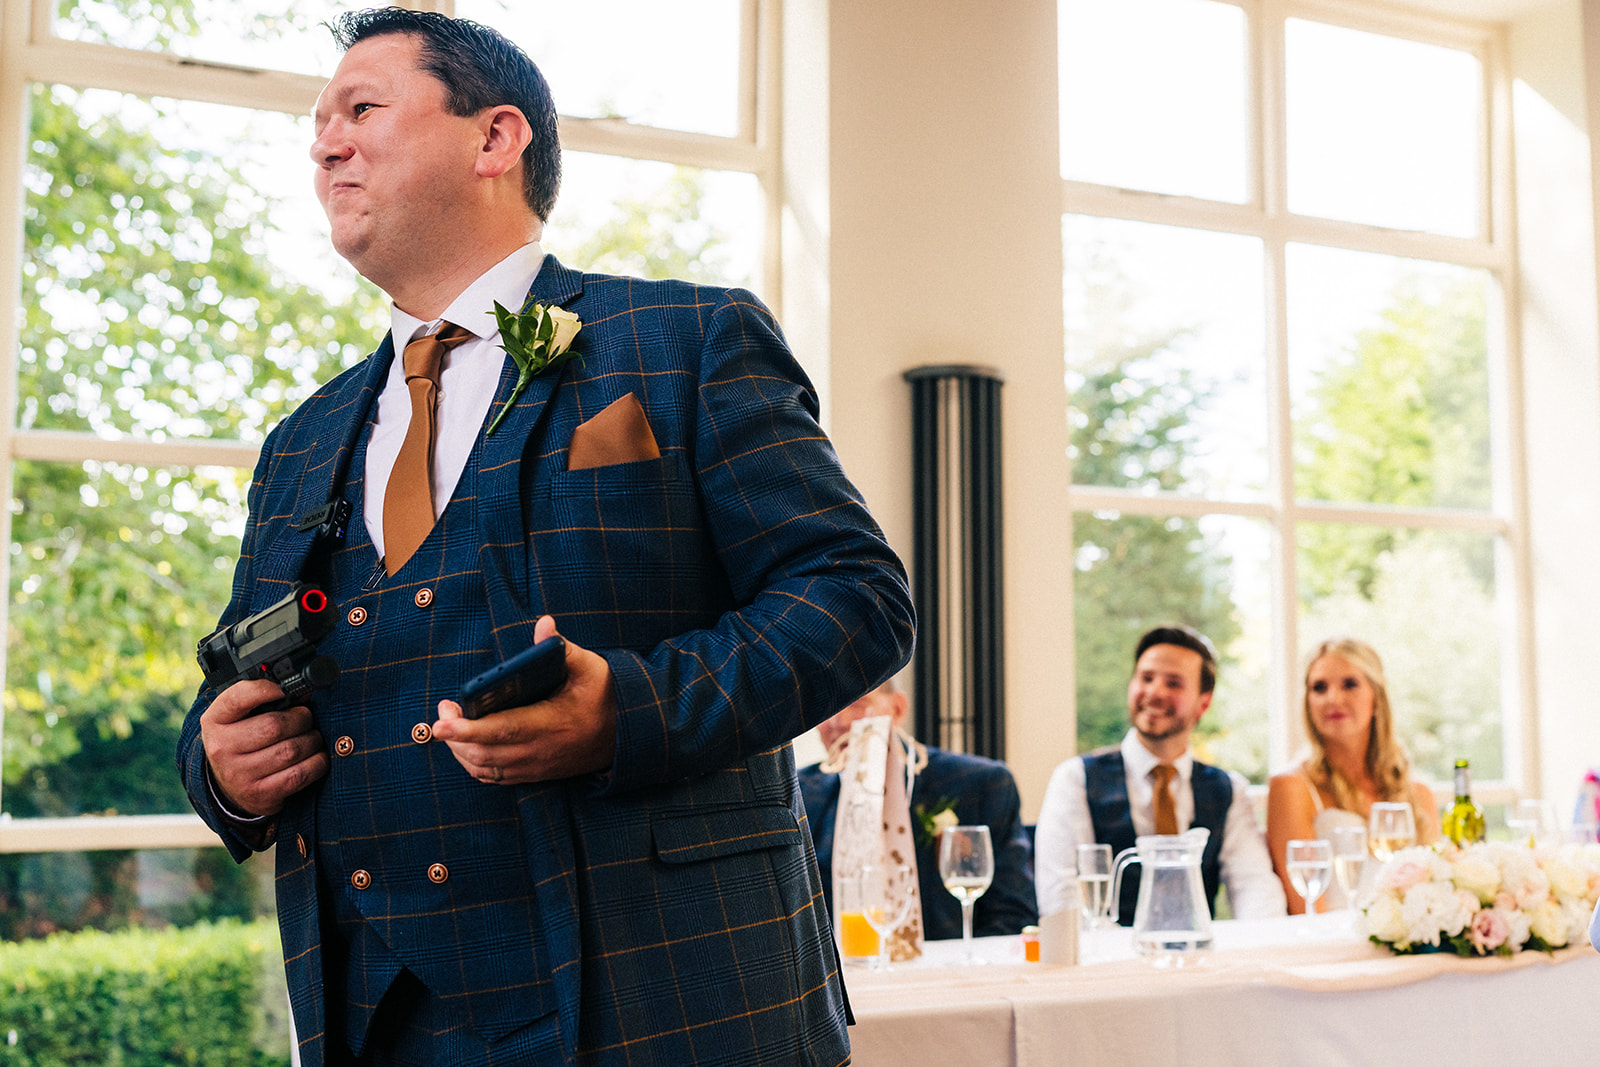 The best man pulled a toy gun out during the best man speech